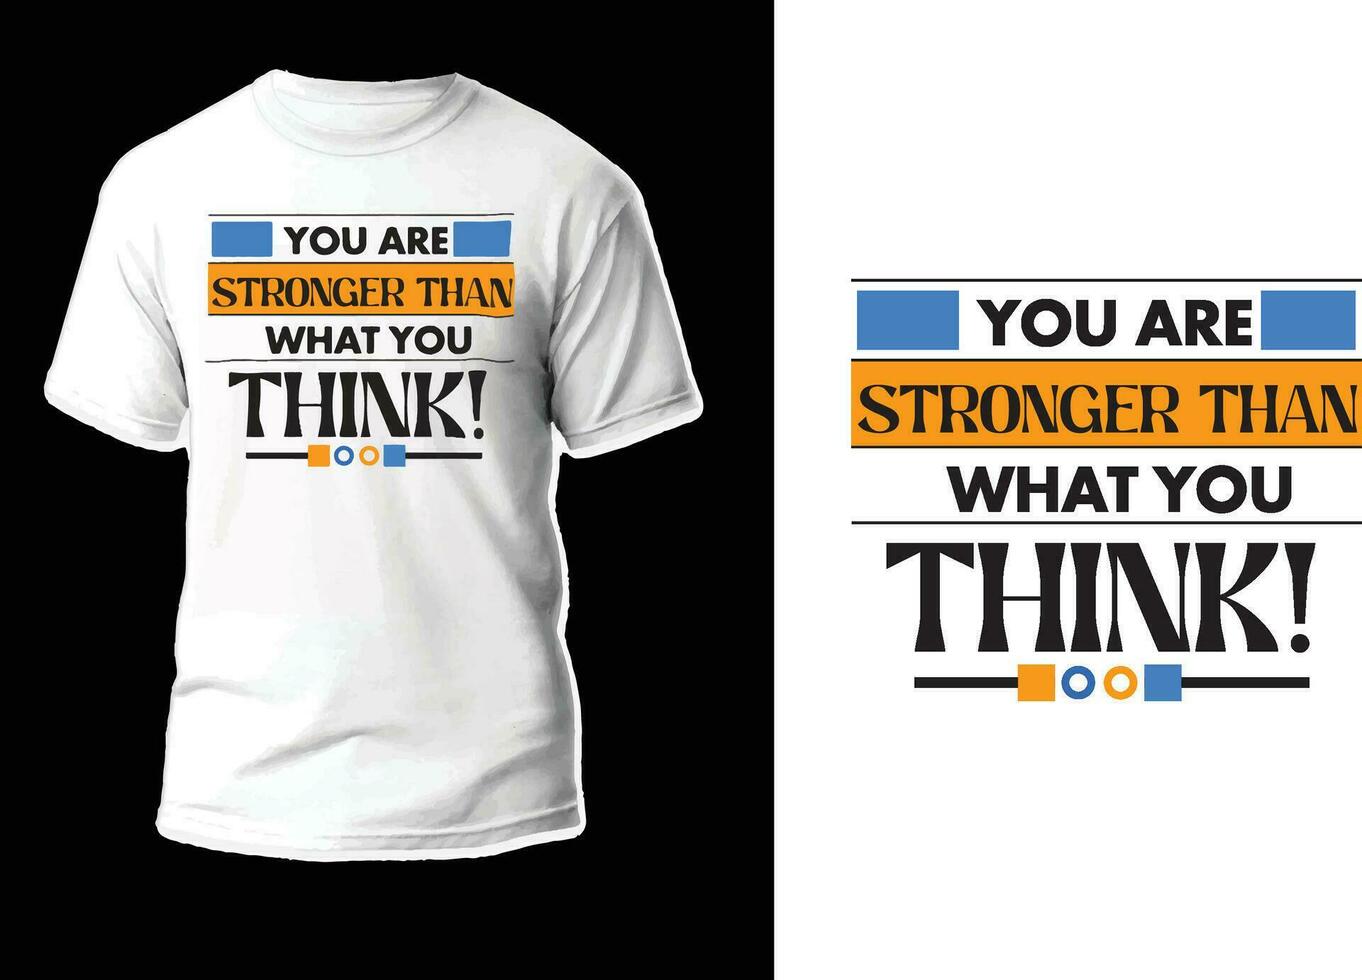 Empower Your Journey with Inspirational T-shirt Designs - Wear Confidence Every Day vector